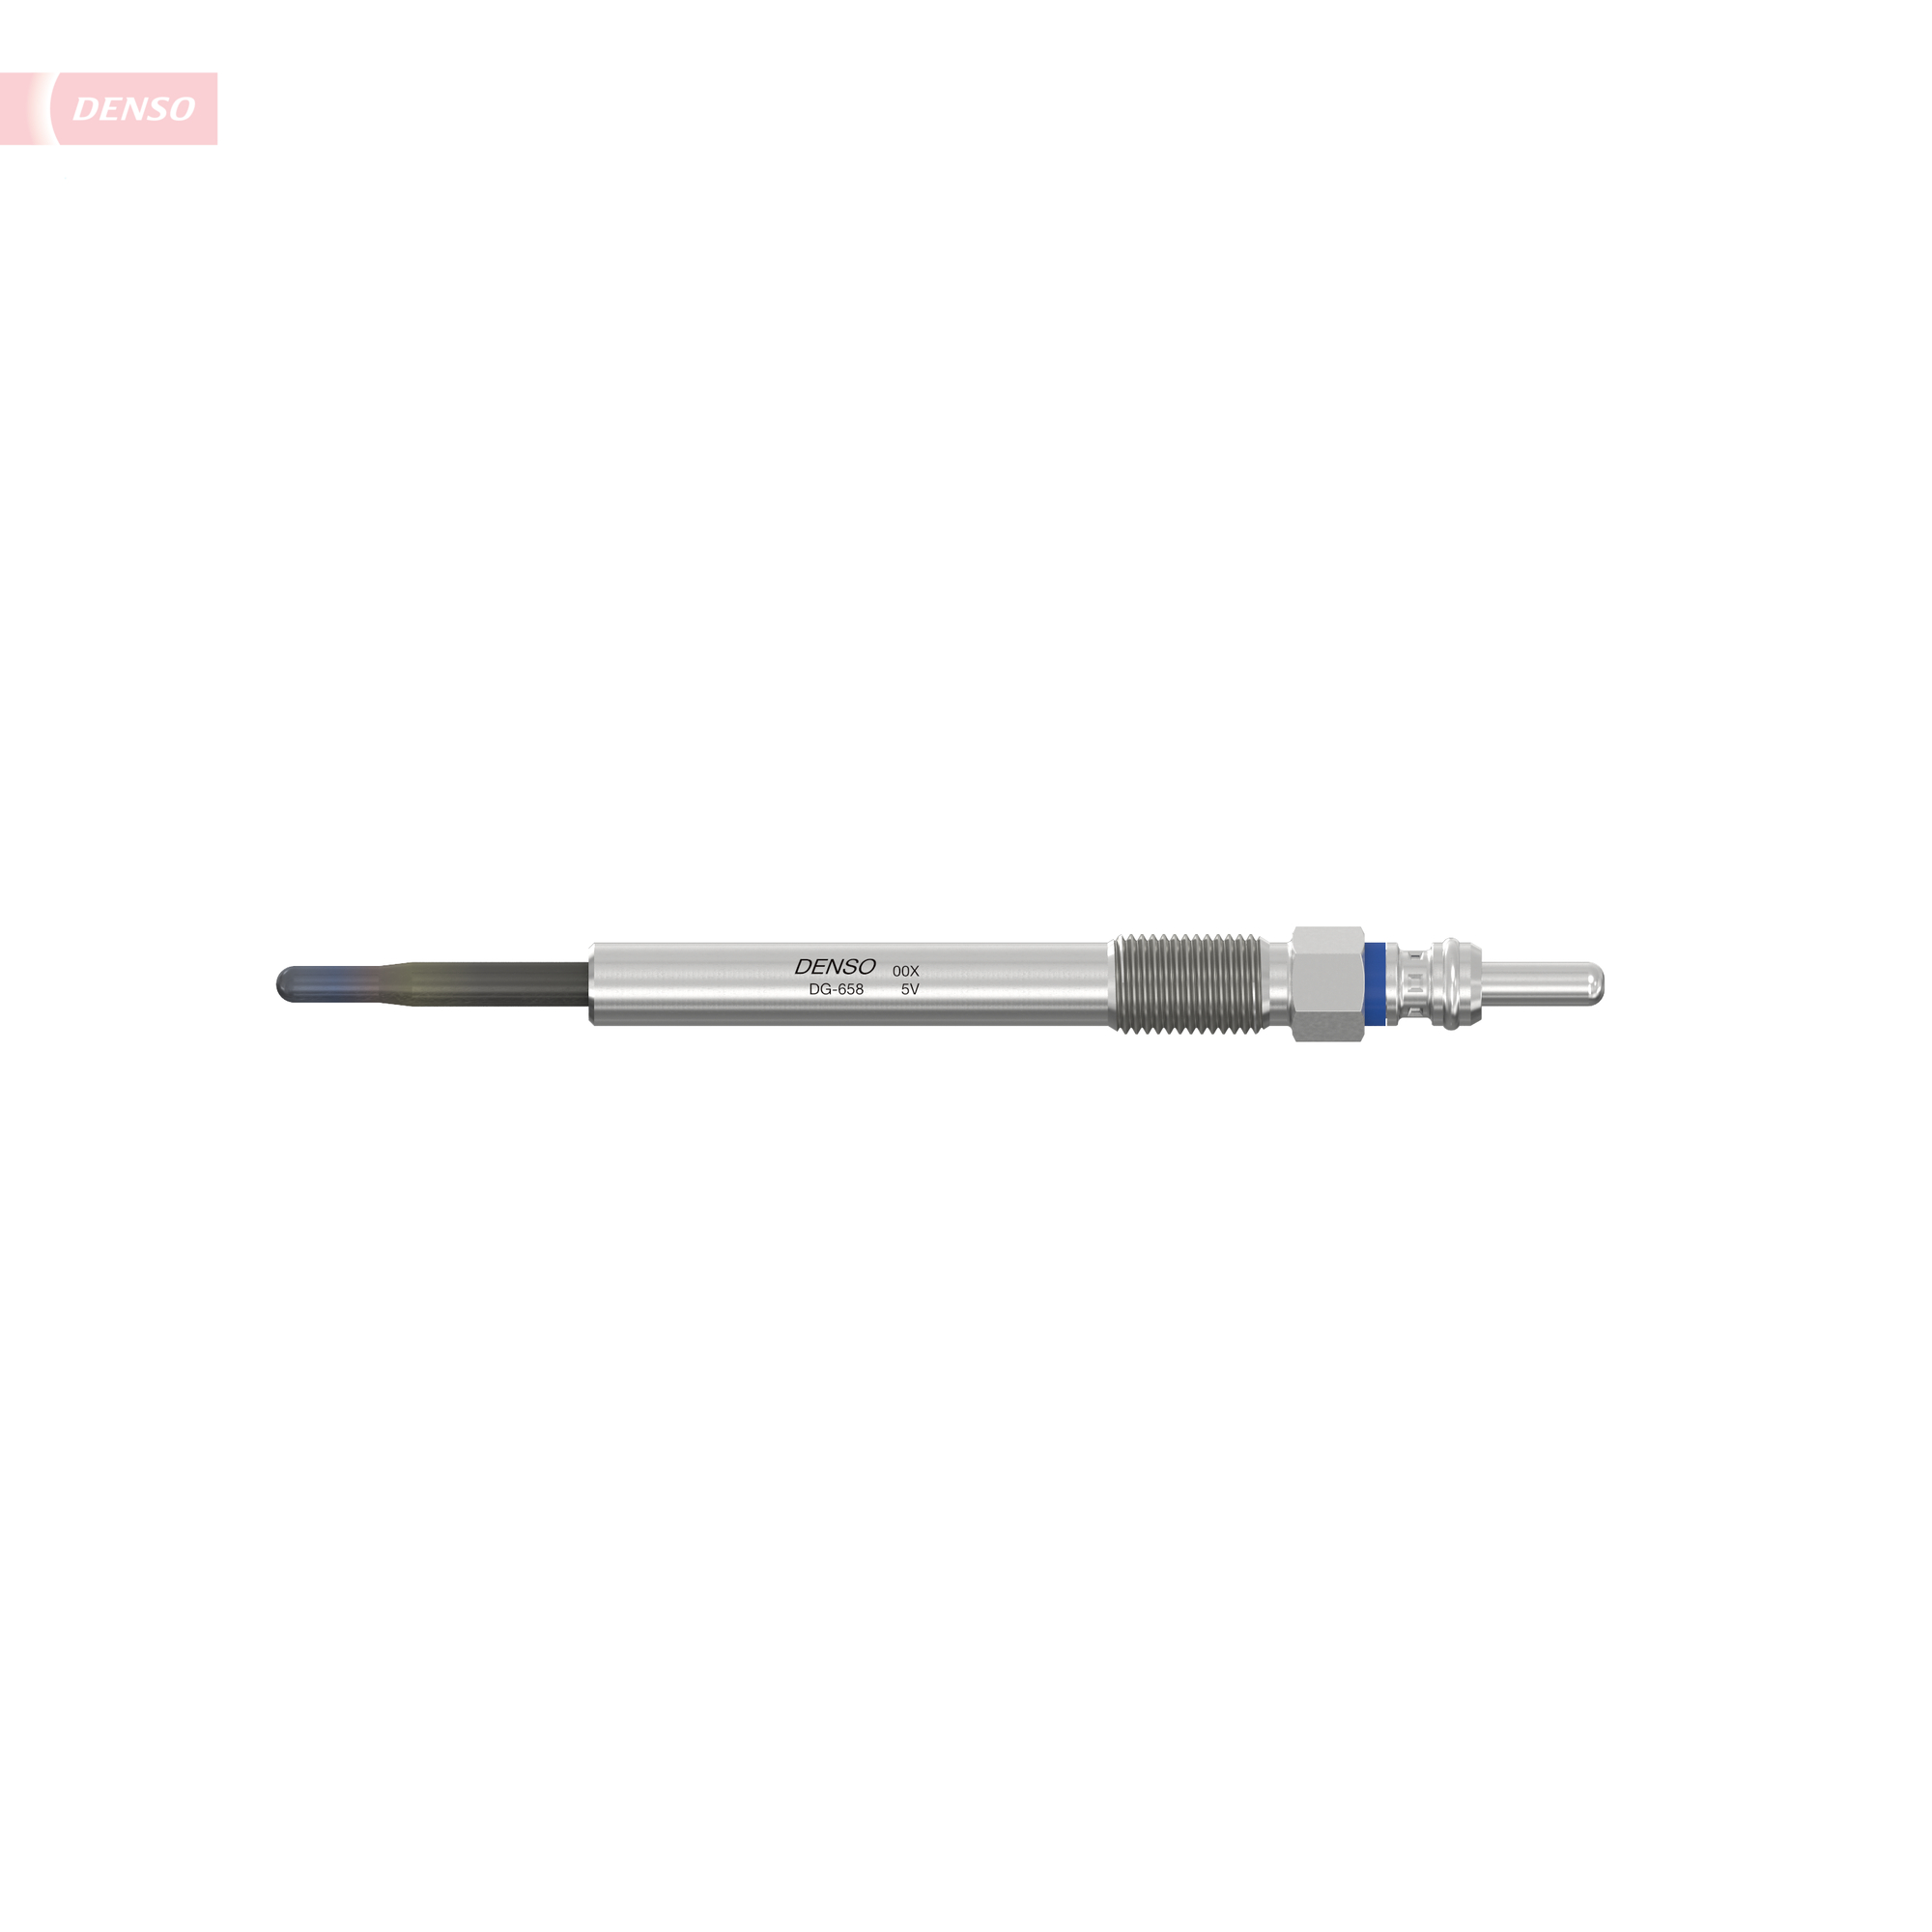 Picture of DENSO - DG-658 - Glow Plug (Glow Ignition System)